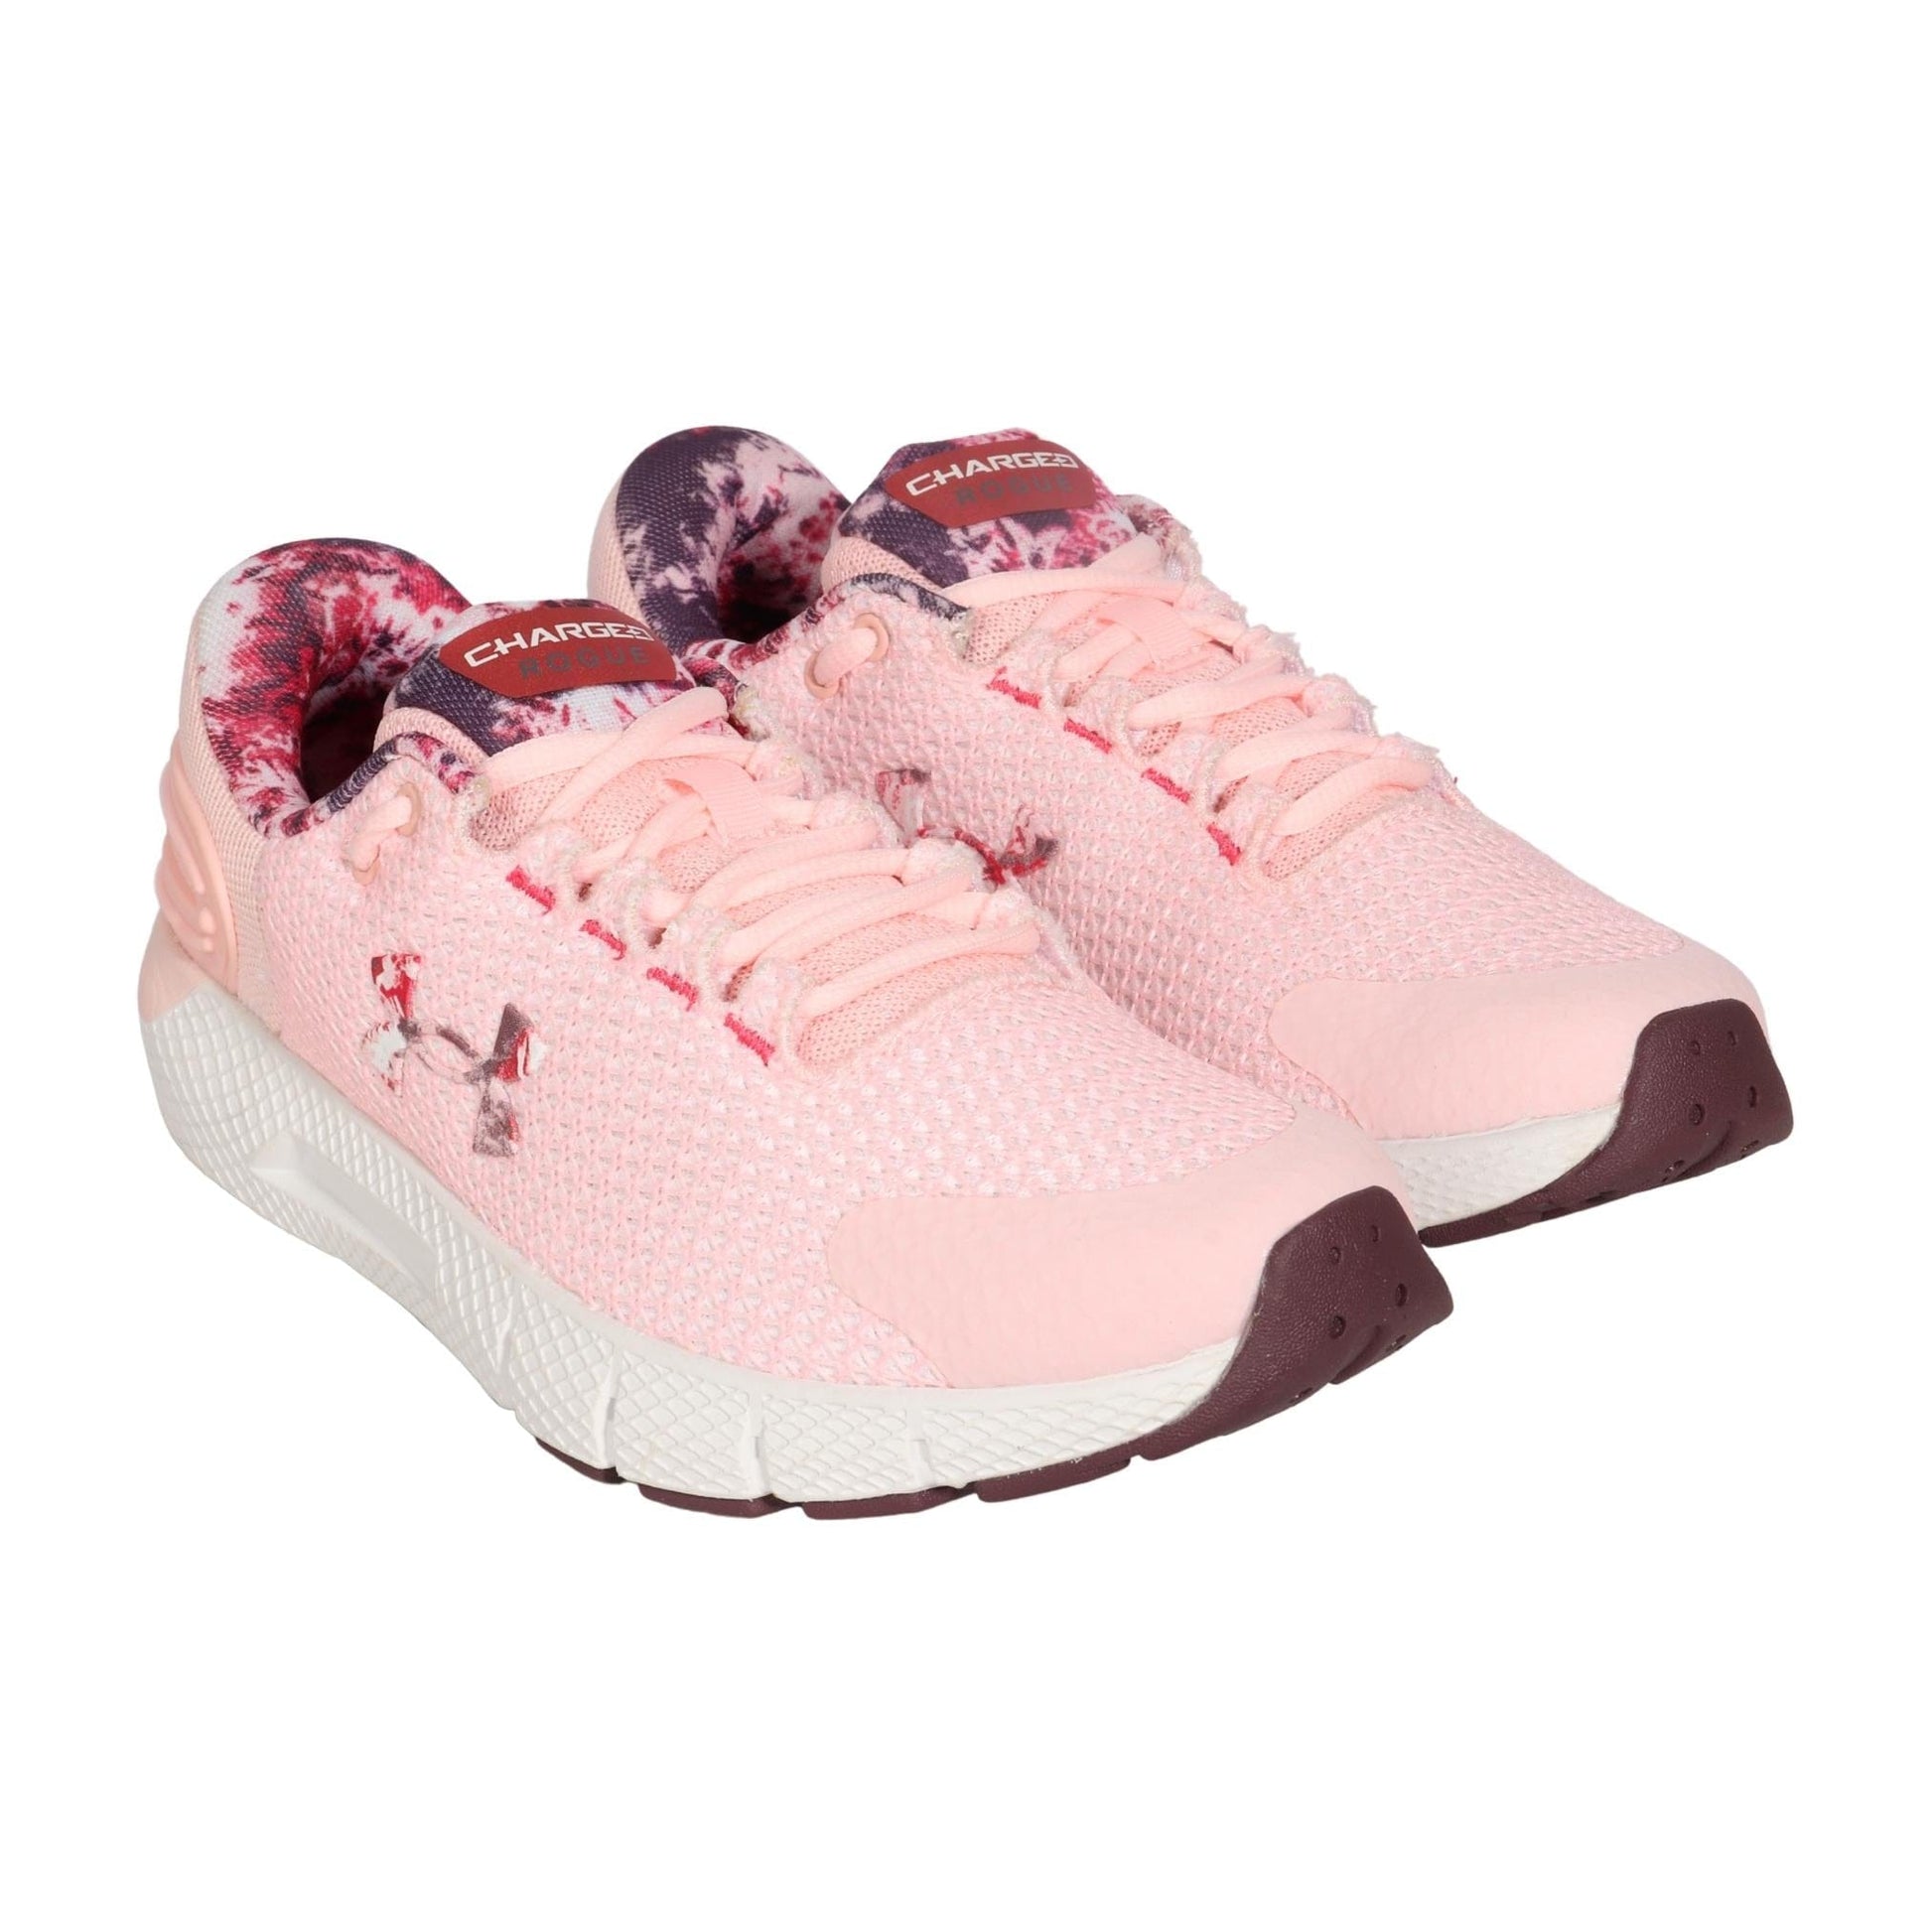 UNDER ARMOUR Athletic Shoes 39 / Pink UNDER ARMOUR - Charged Rogue 2.5 Womens Running Shoes